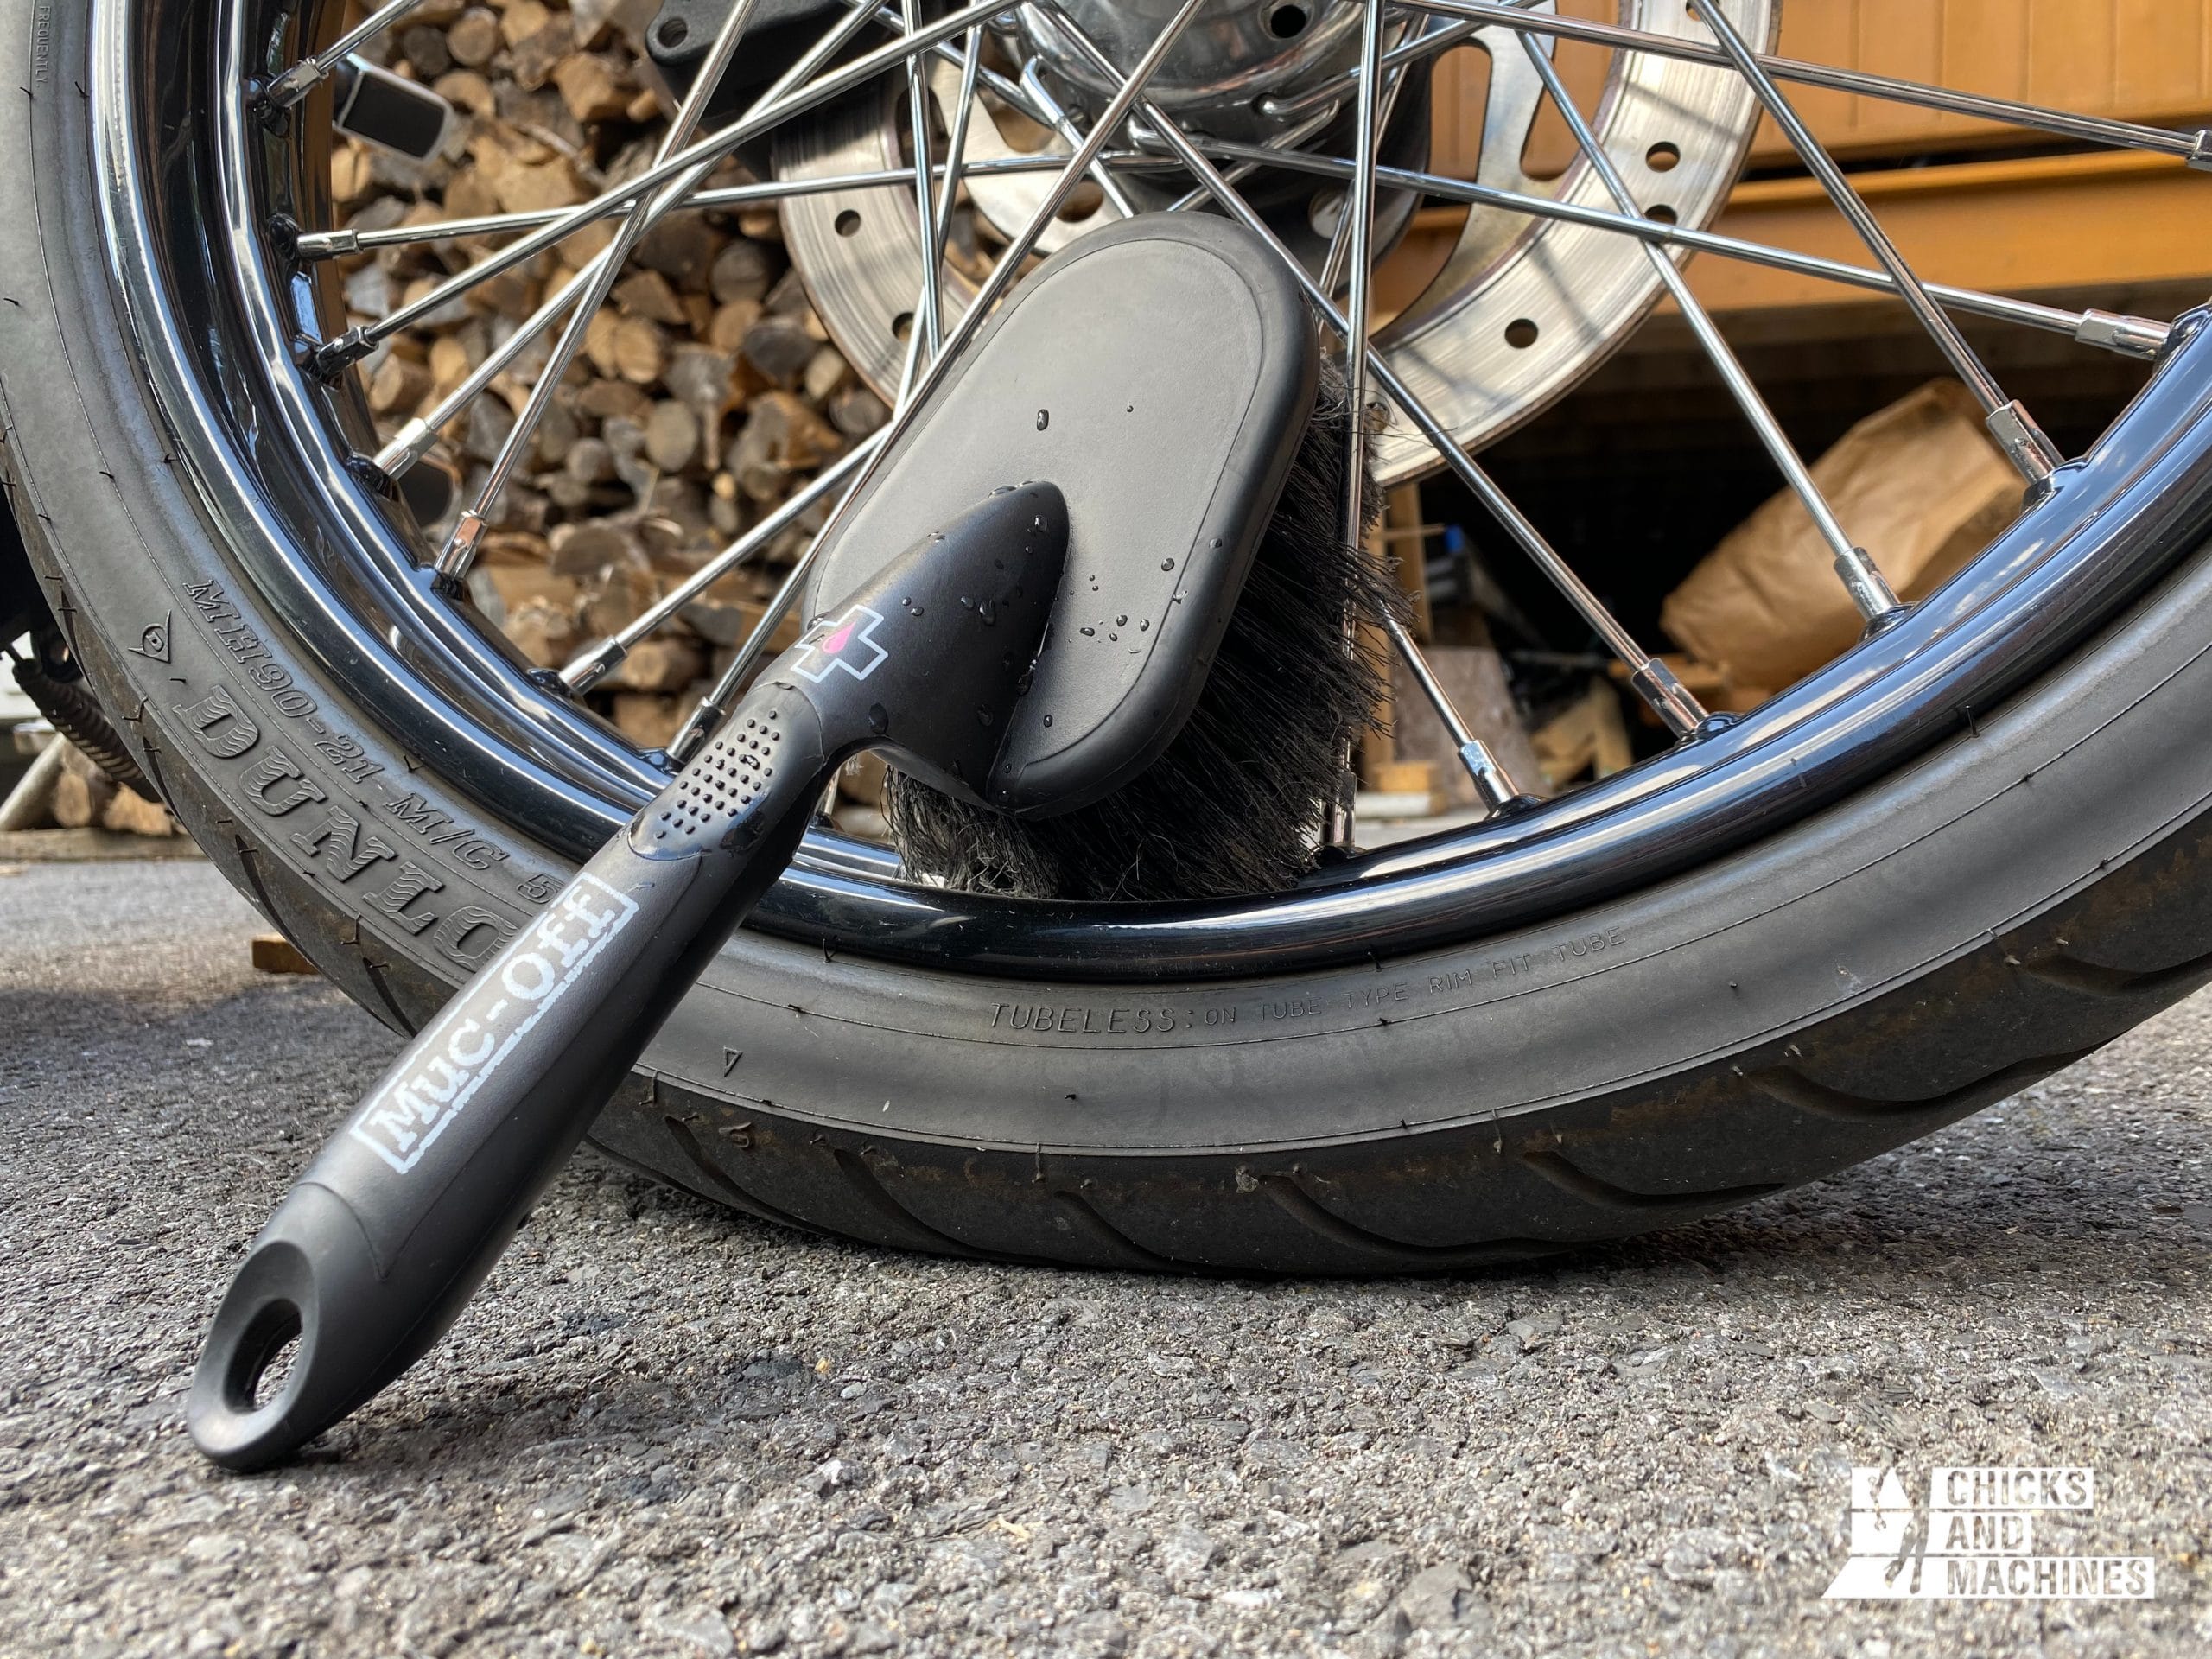 The Muc-Off cleaning brush will not damage your bike!